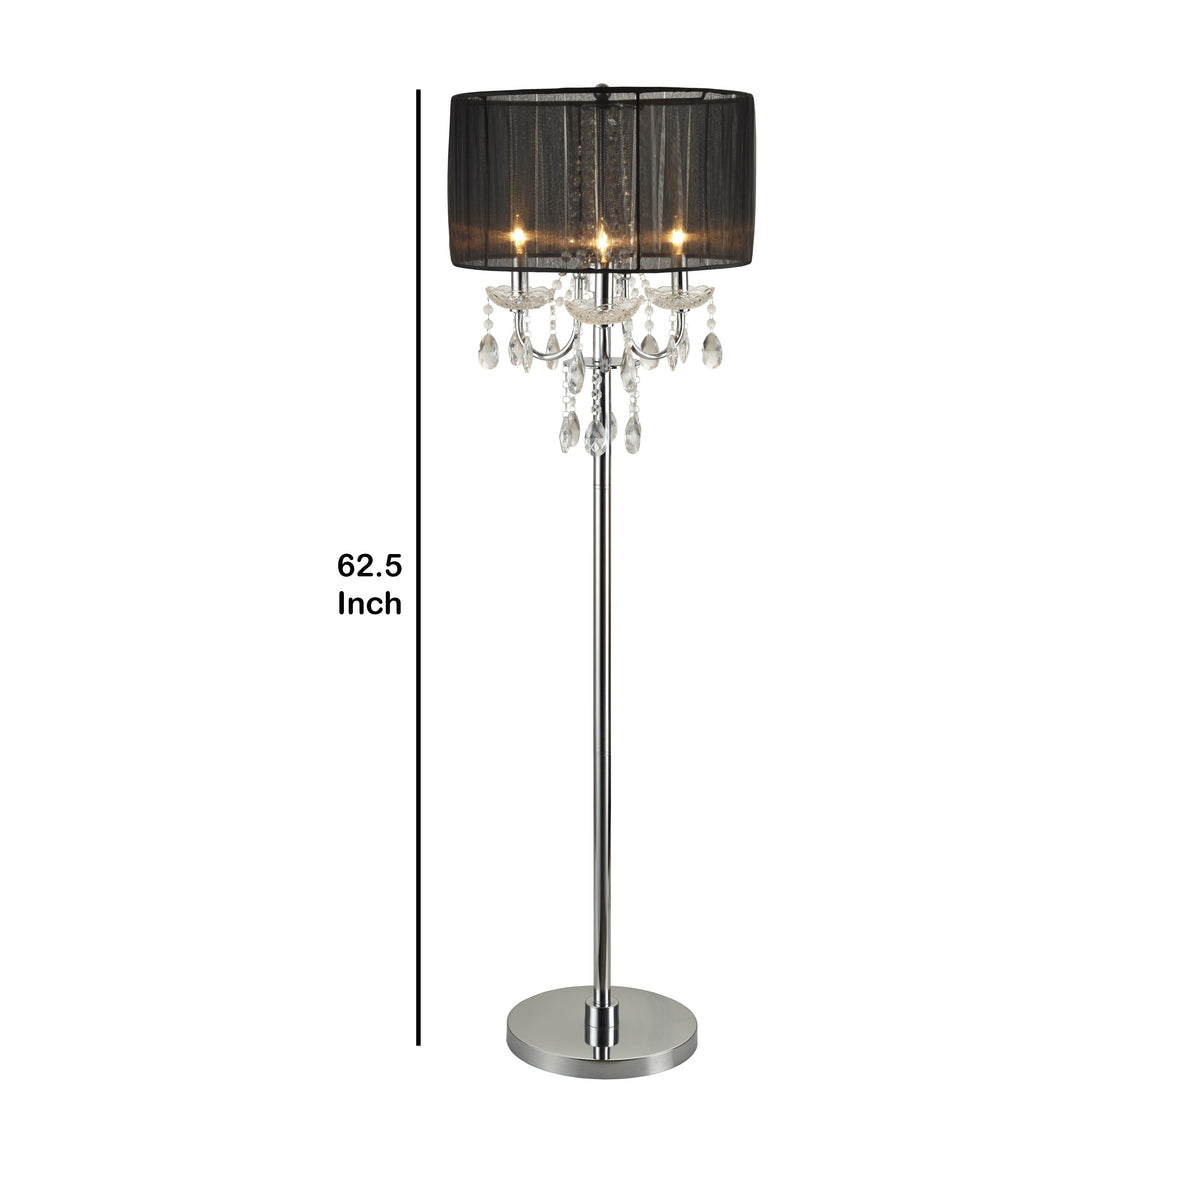 Round Fabric Wrapped Floor Lamp with Crystal Inlay, Gray and Silver - BM220568